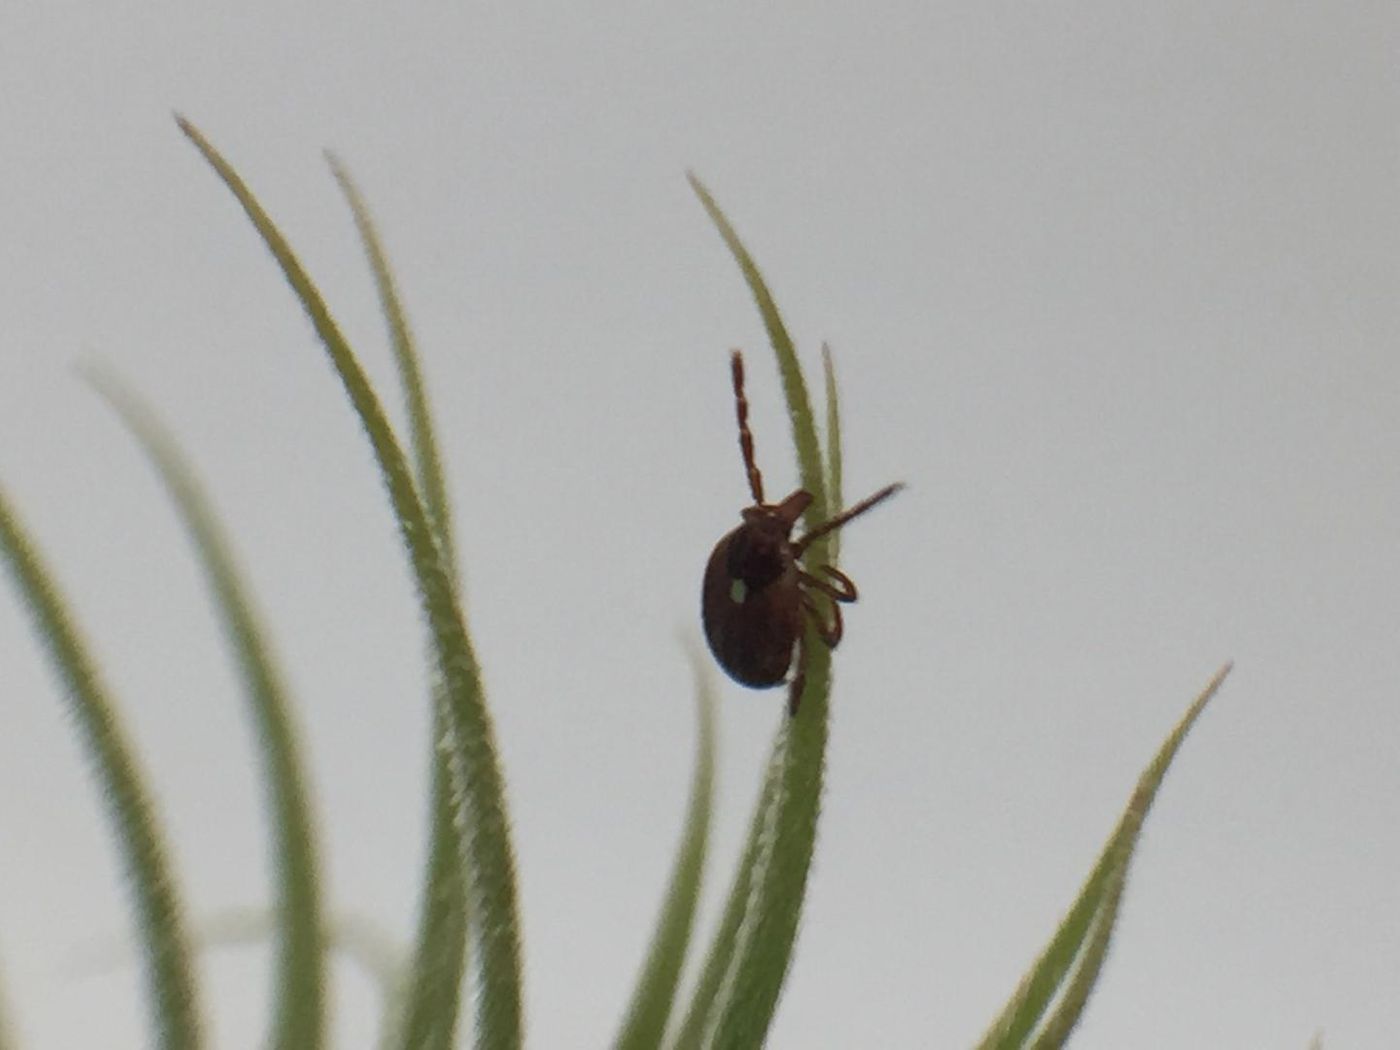 This is an adult female Lone Star tick climbing on a plant. Bites from the juvenile form of this species, sometimes called seed ticks, are linked to the development of red meat allergy. Credit: NIAID